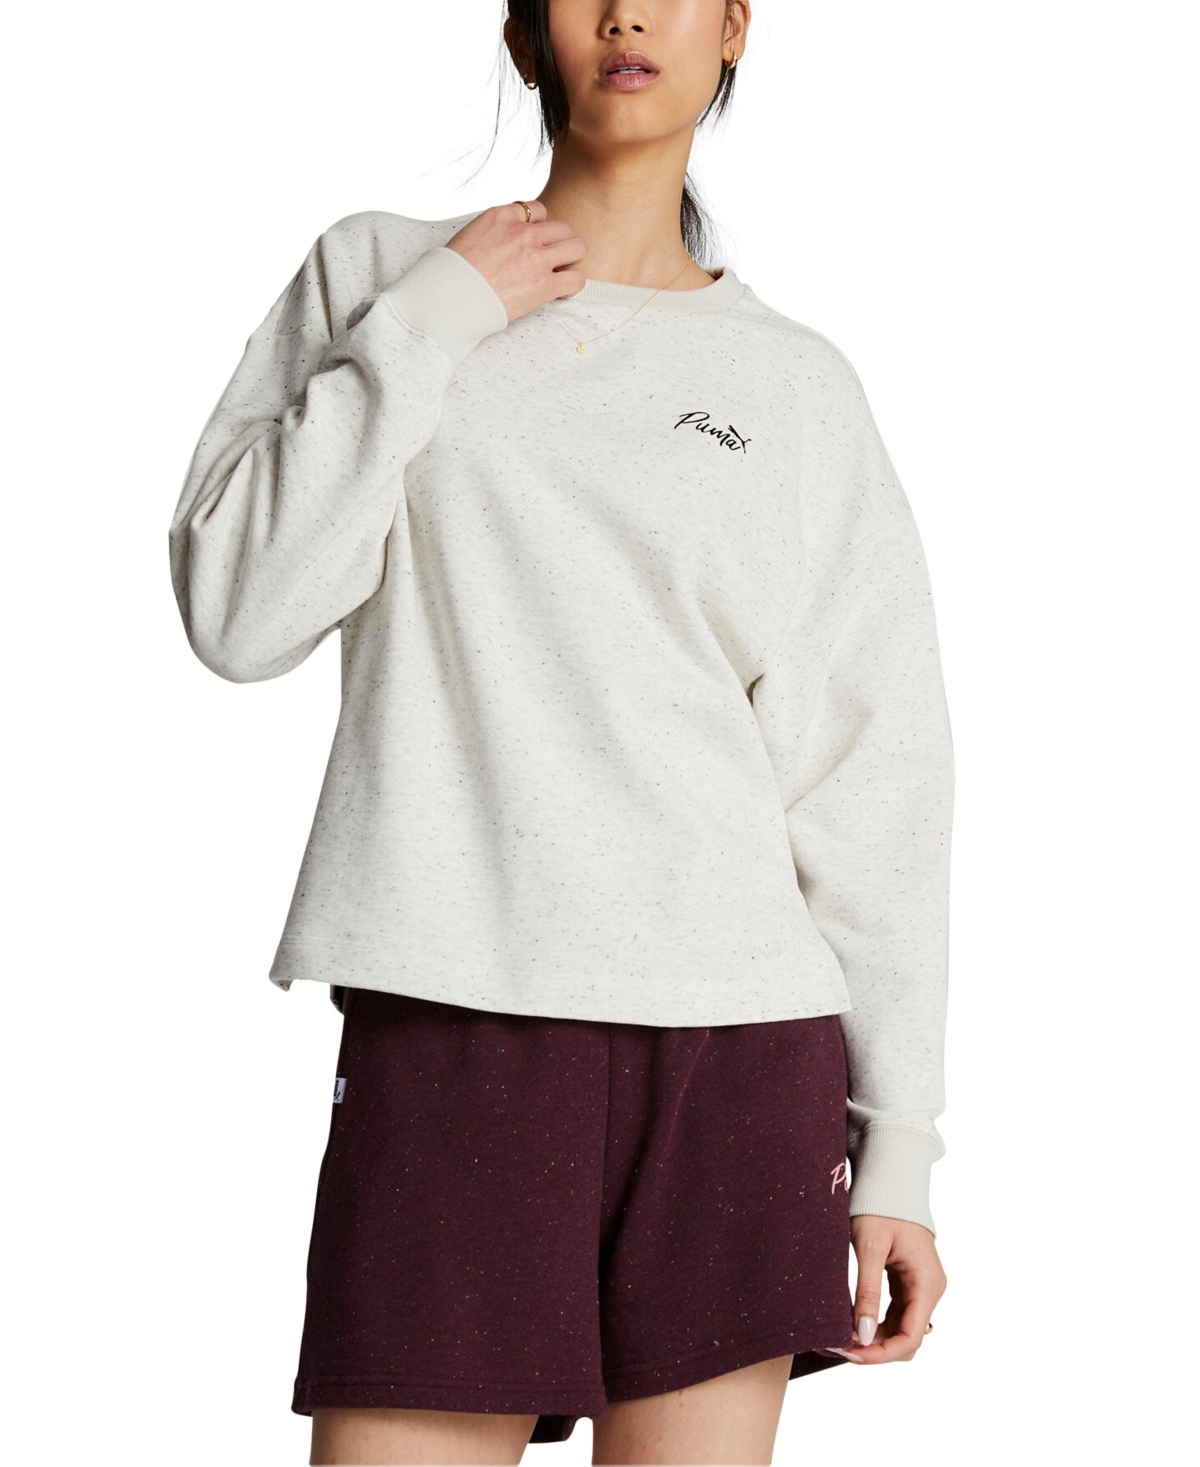 Puma Women's Live In Cotton French Terry Crewneck Top In Gray